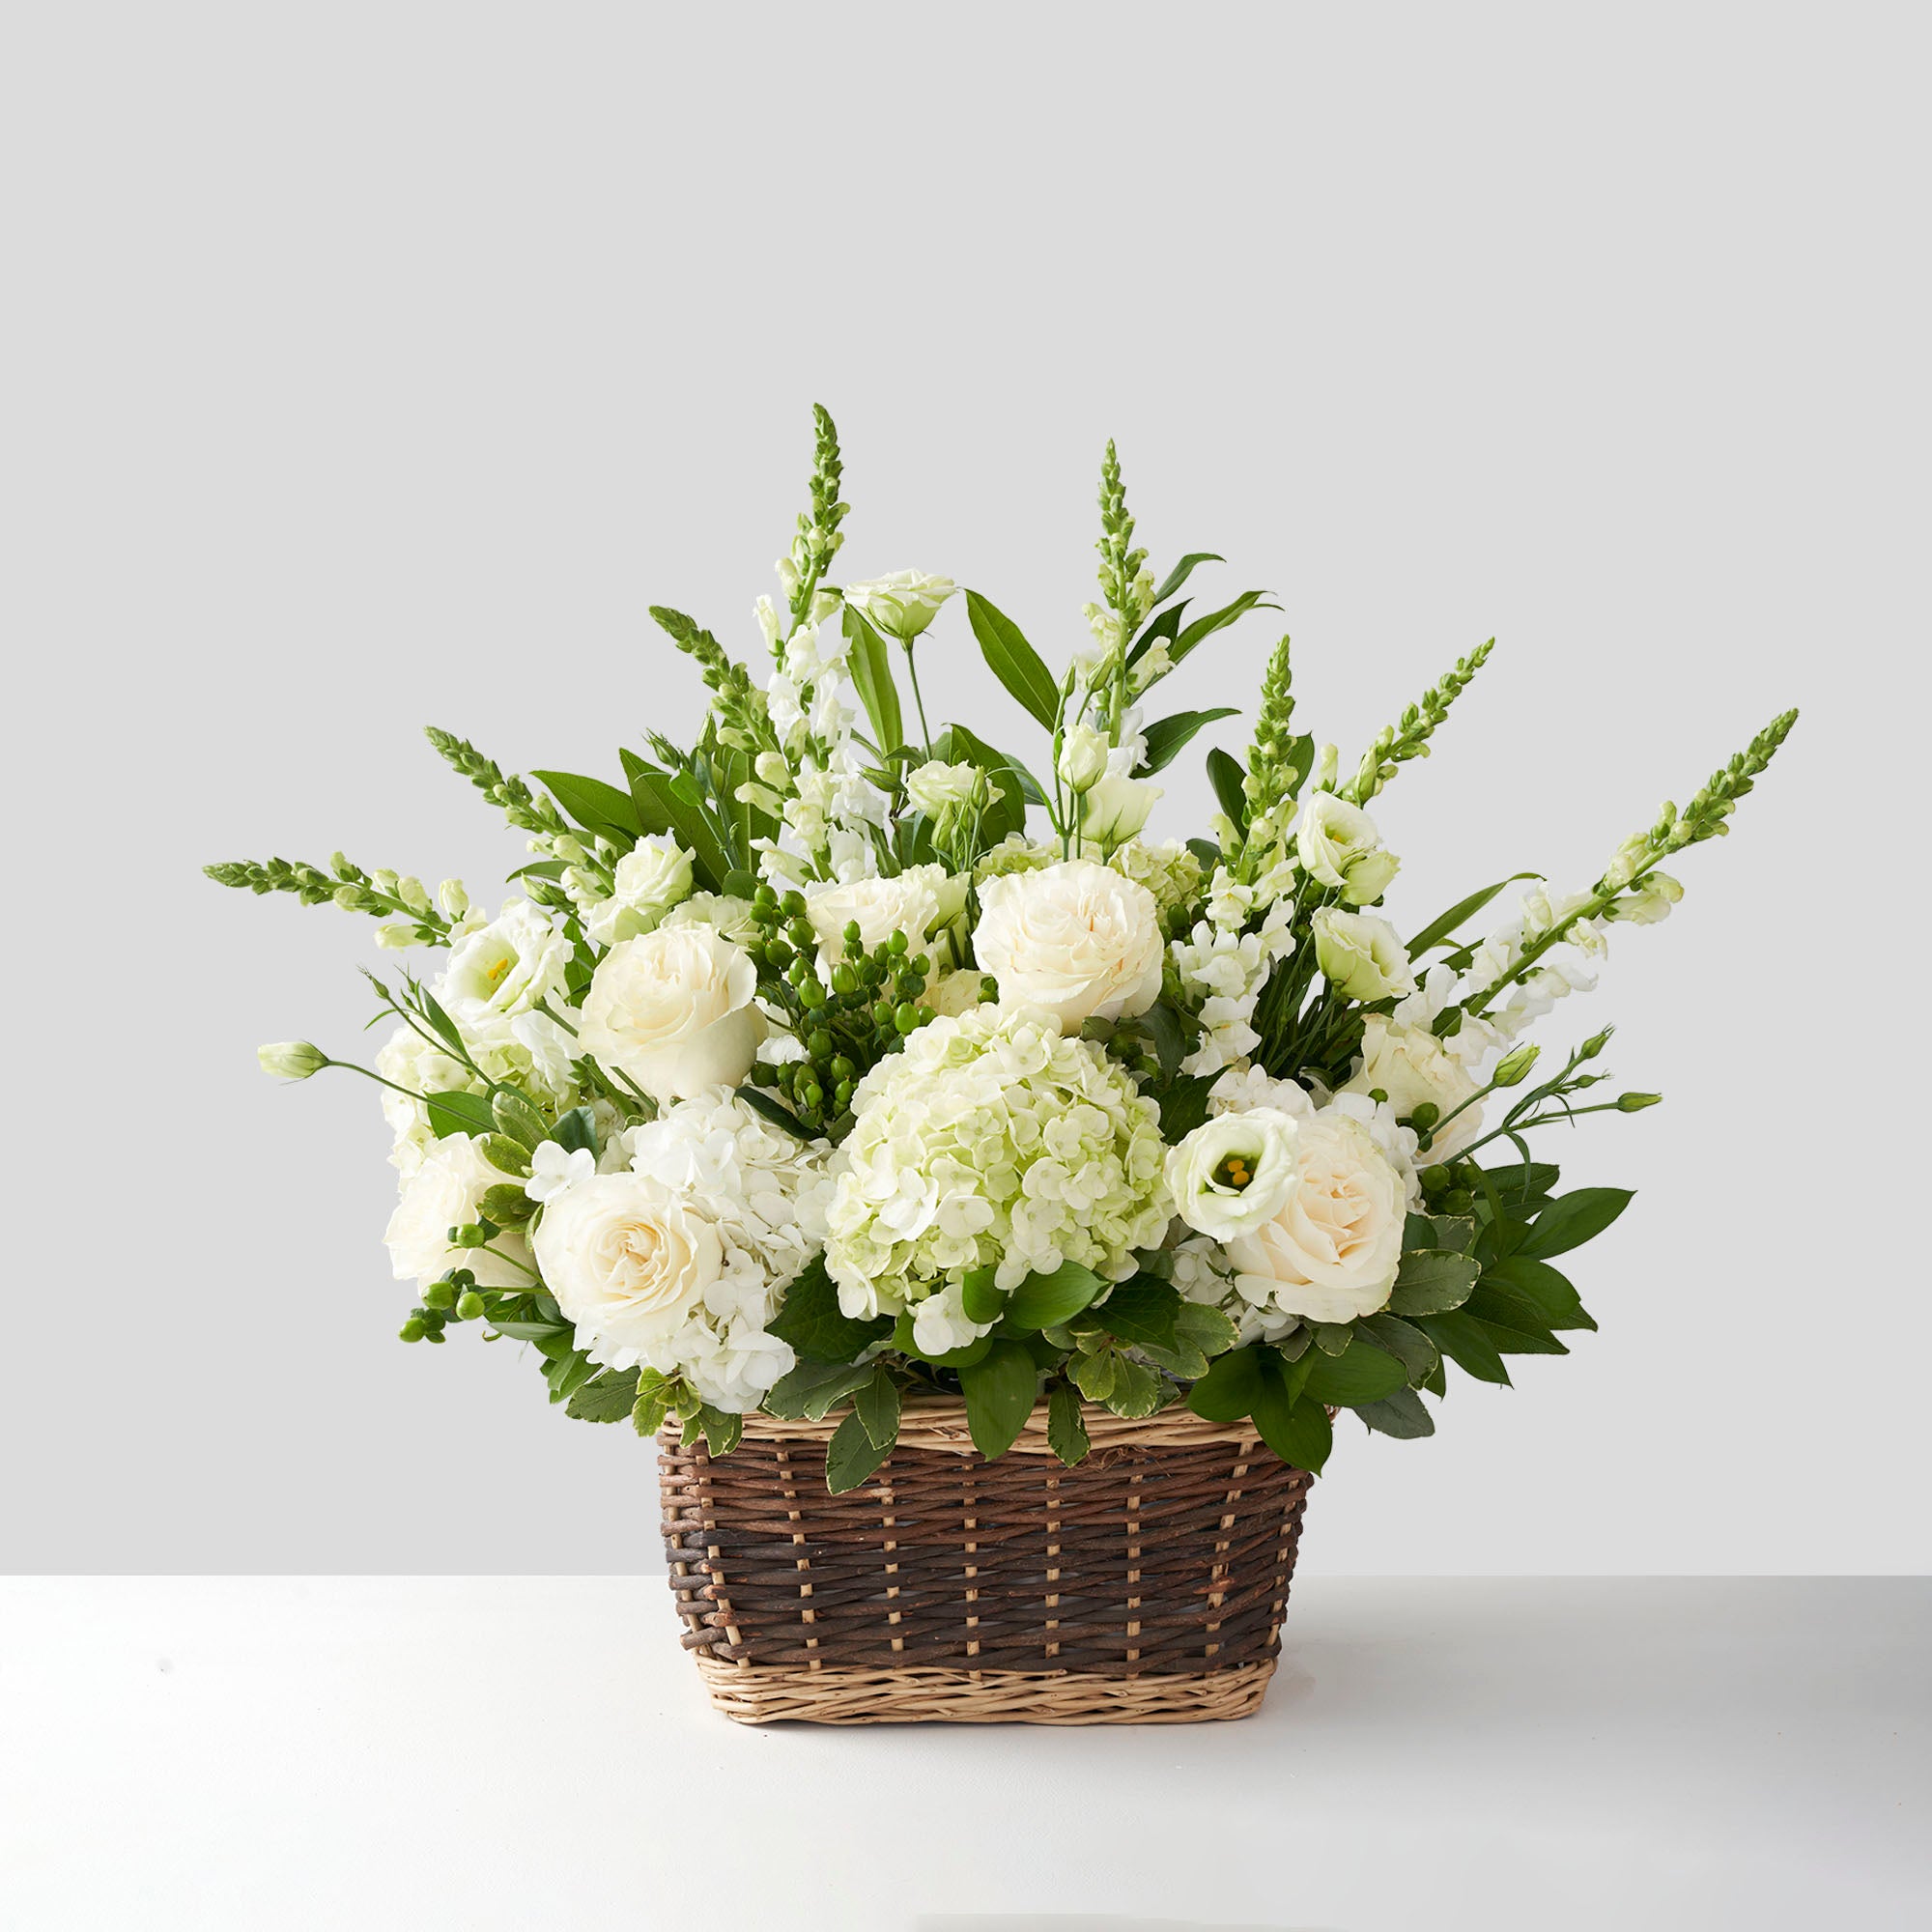 Large spray of all white flowers in natural basket.